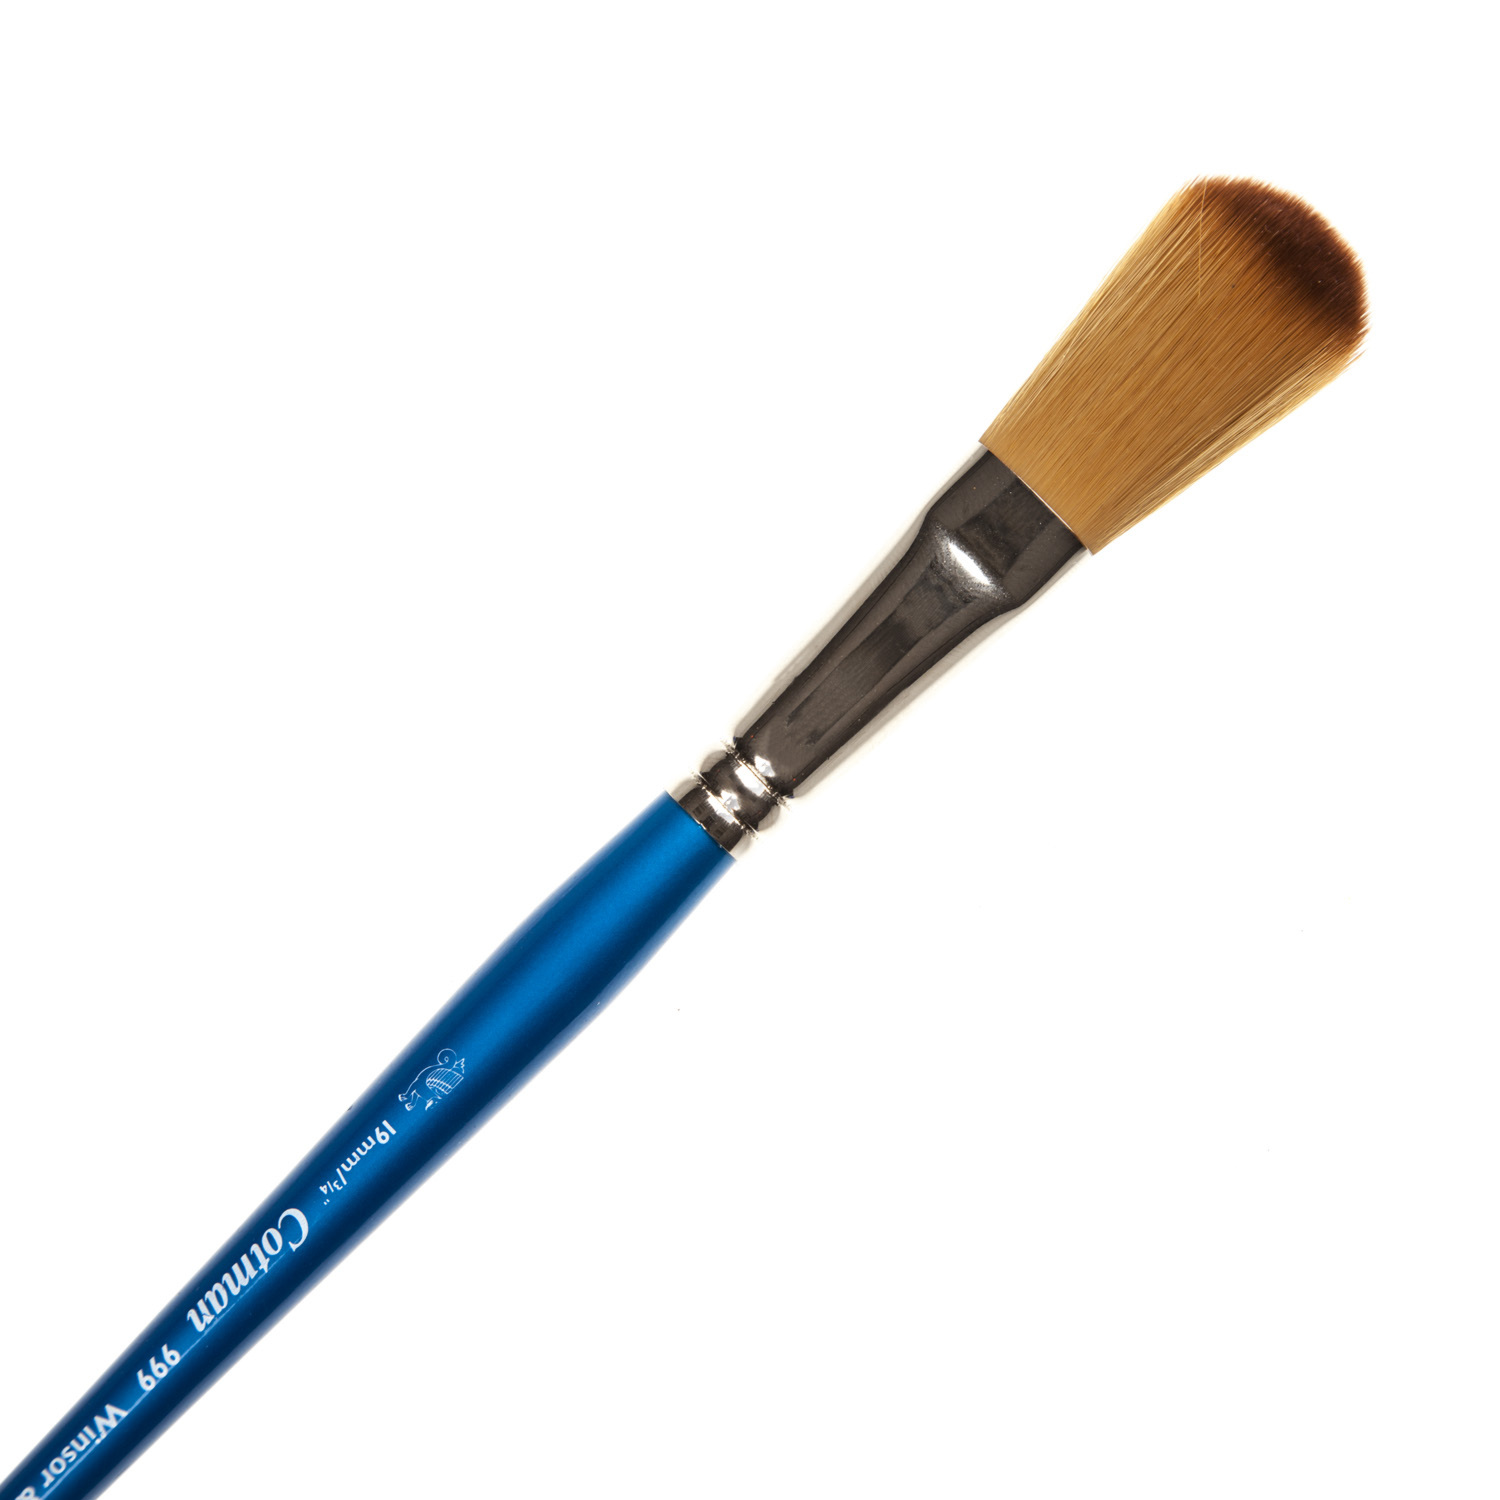 Winsor and Newton Cotman Watercolour Mop Brush - Blue / 3/4 inch Image 1